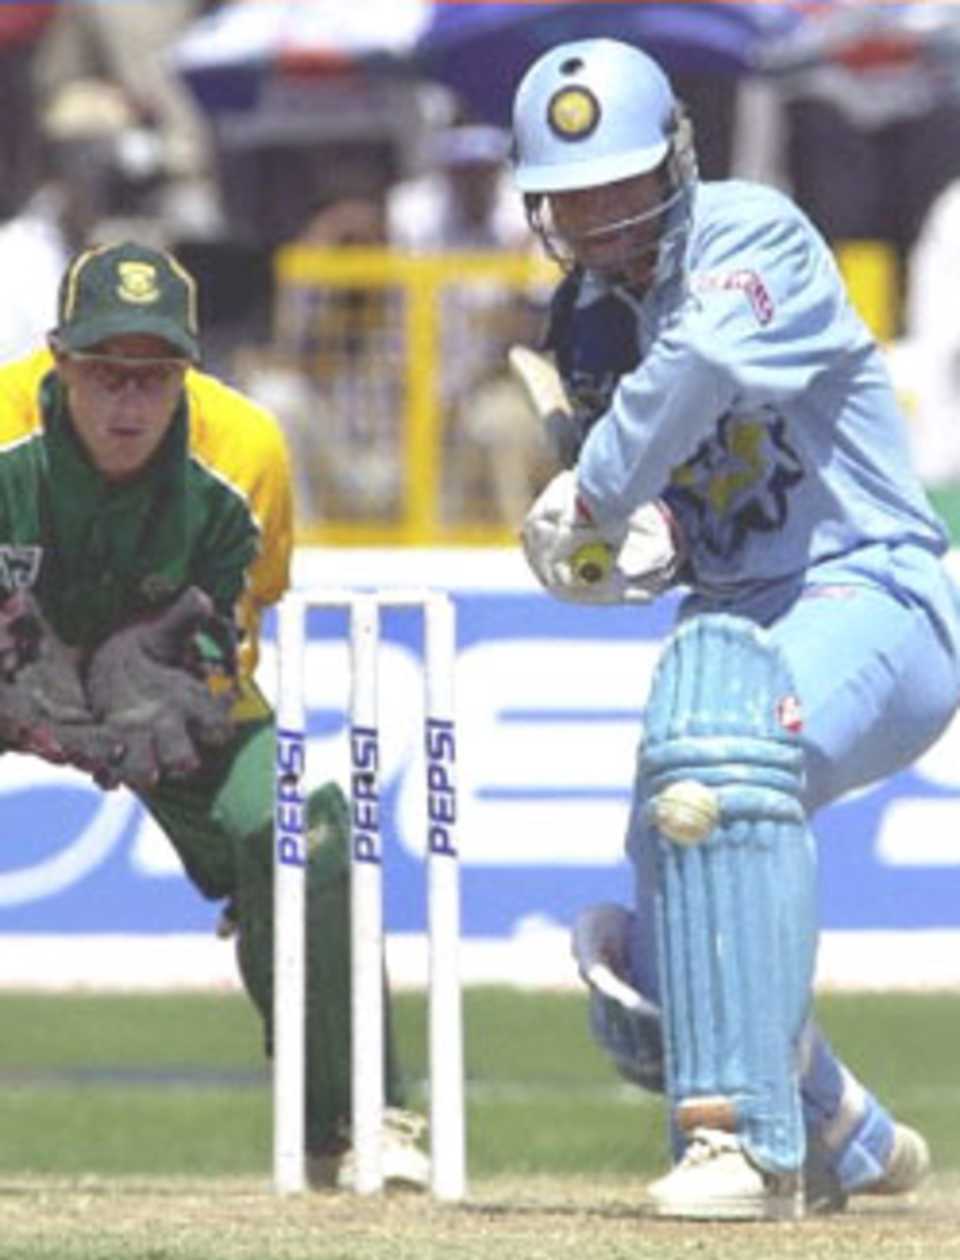 Rahul Dravid about to launch into a drive